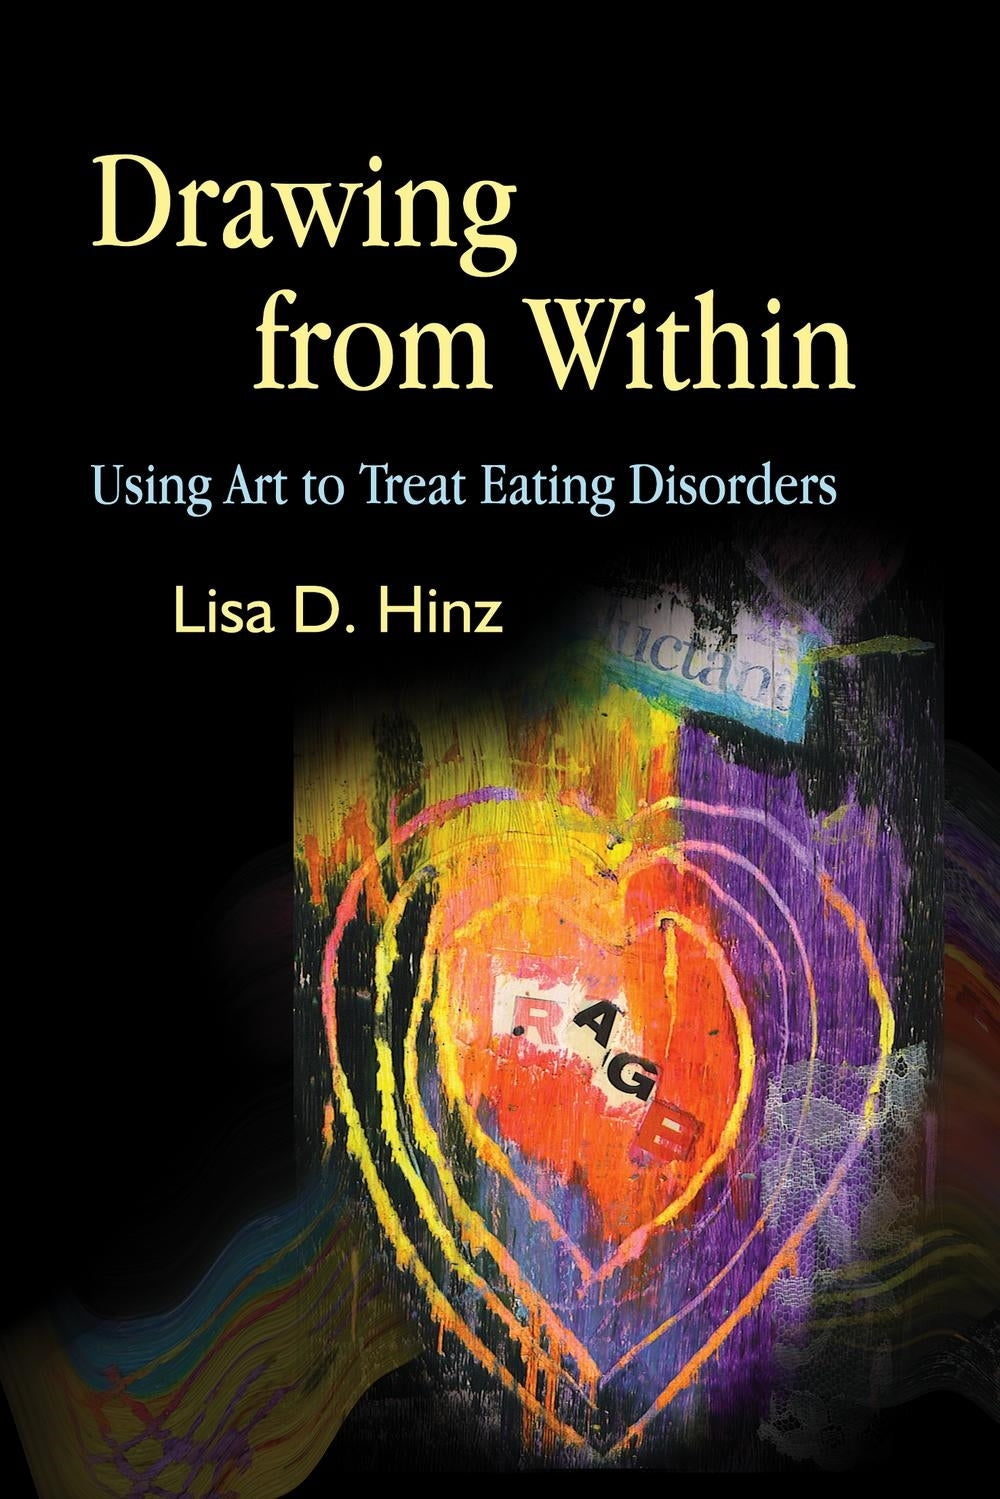 Drawing from Within by Lisa Hinz